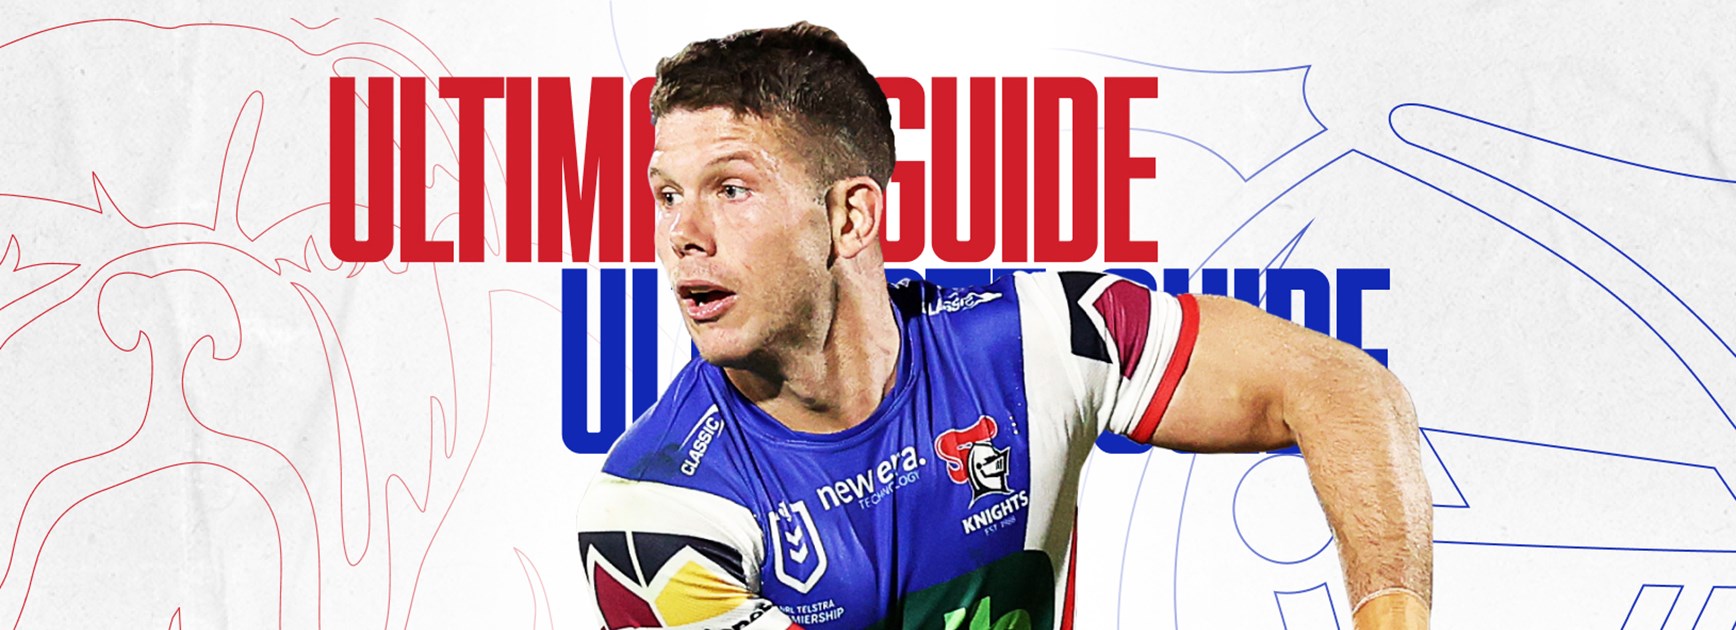 Ultimate Guide: NRL Round 7 preview